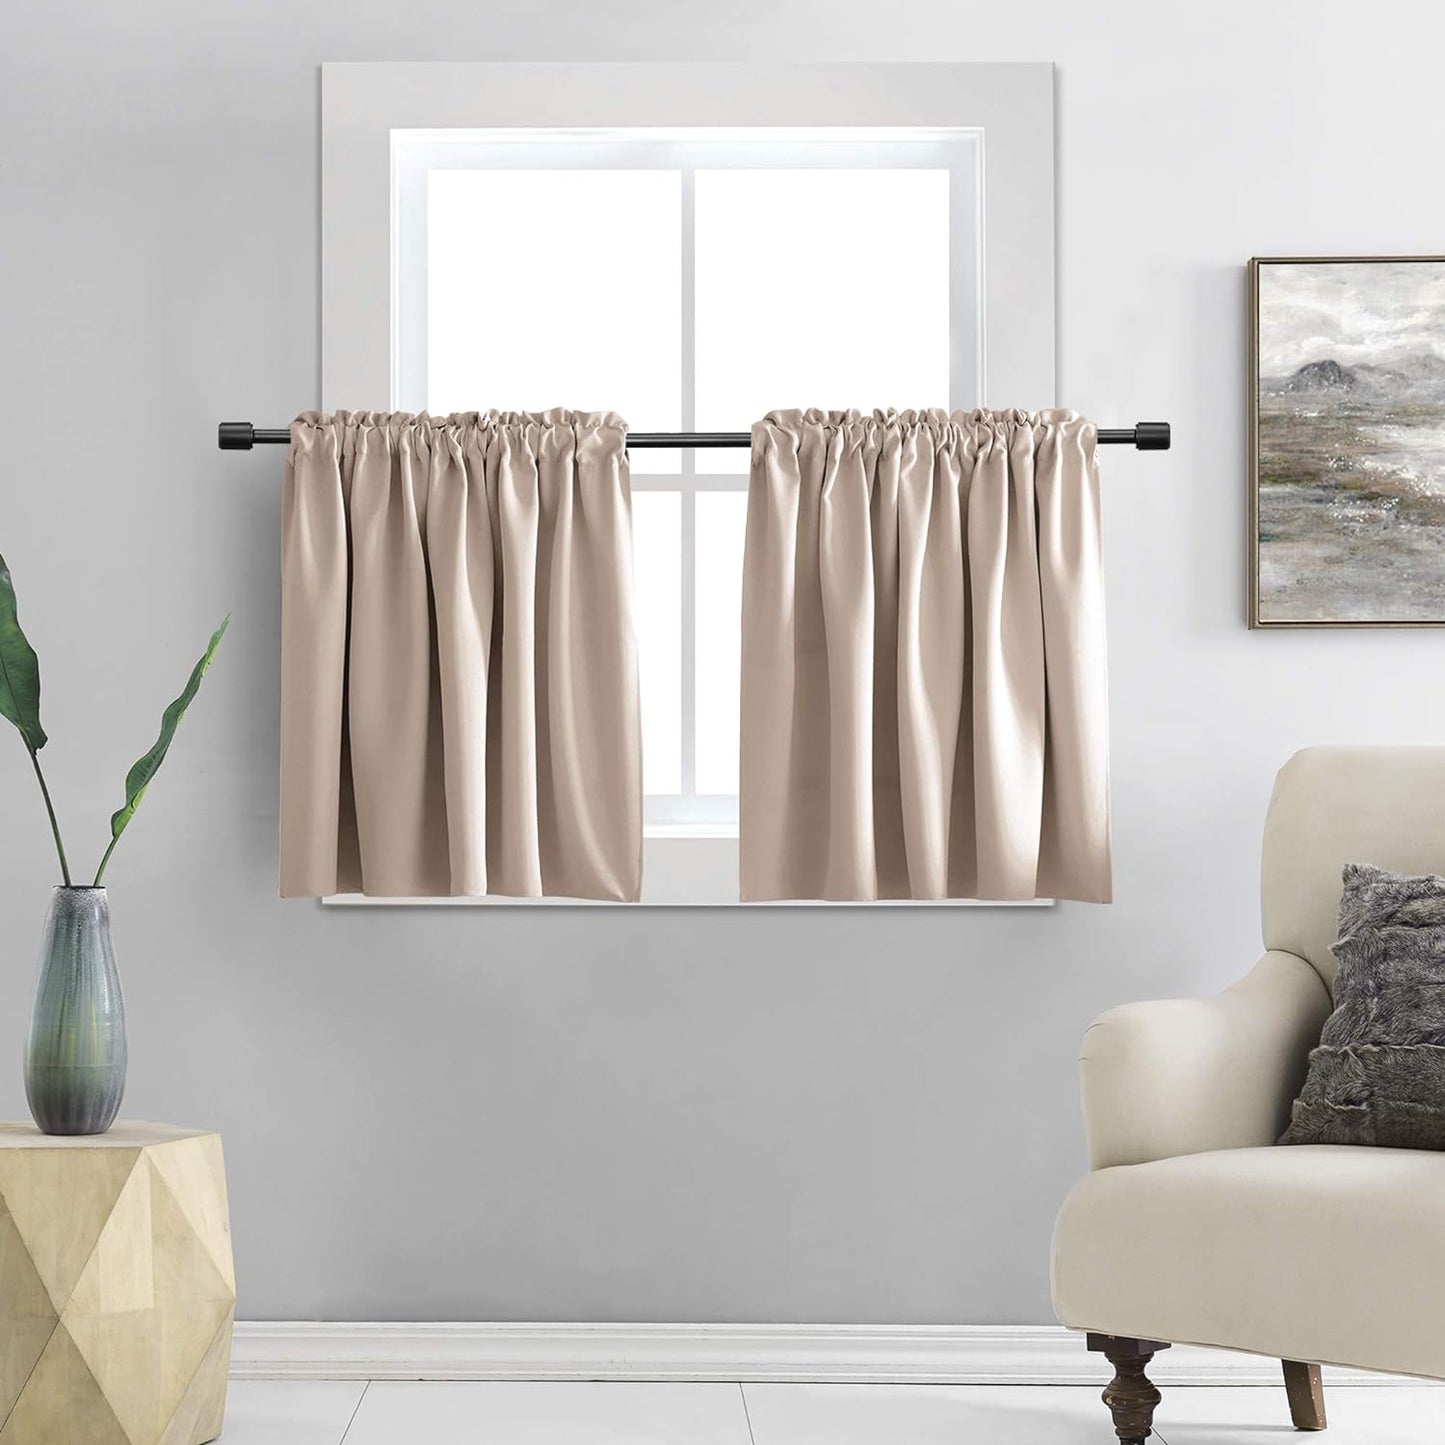 DONREN 24 Inch Length Curtains- 2 Panels Blackout Thermal Insulating Small Curtain Tiers for Bathroom with Rod Pocket (Black,42 Inch Width)  DONREN Taupe 30" X 36" 